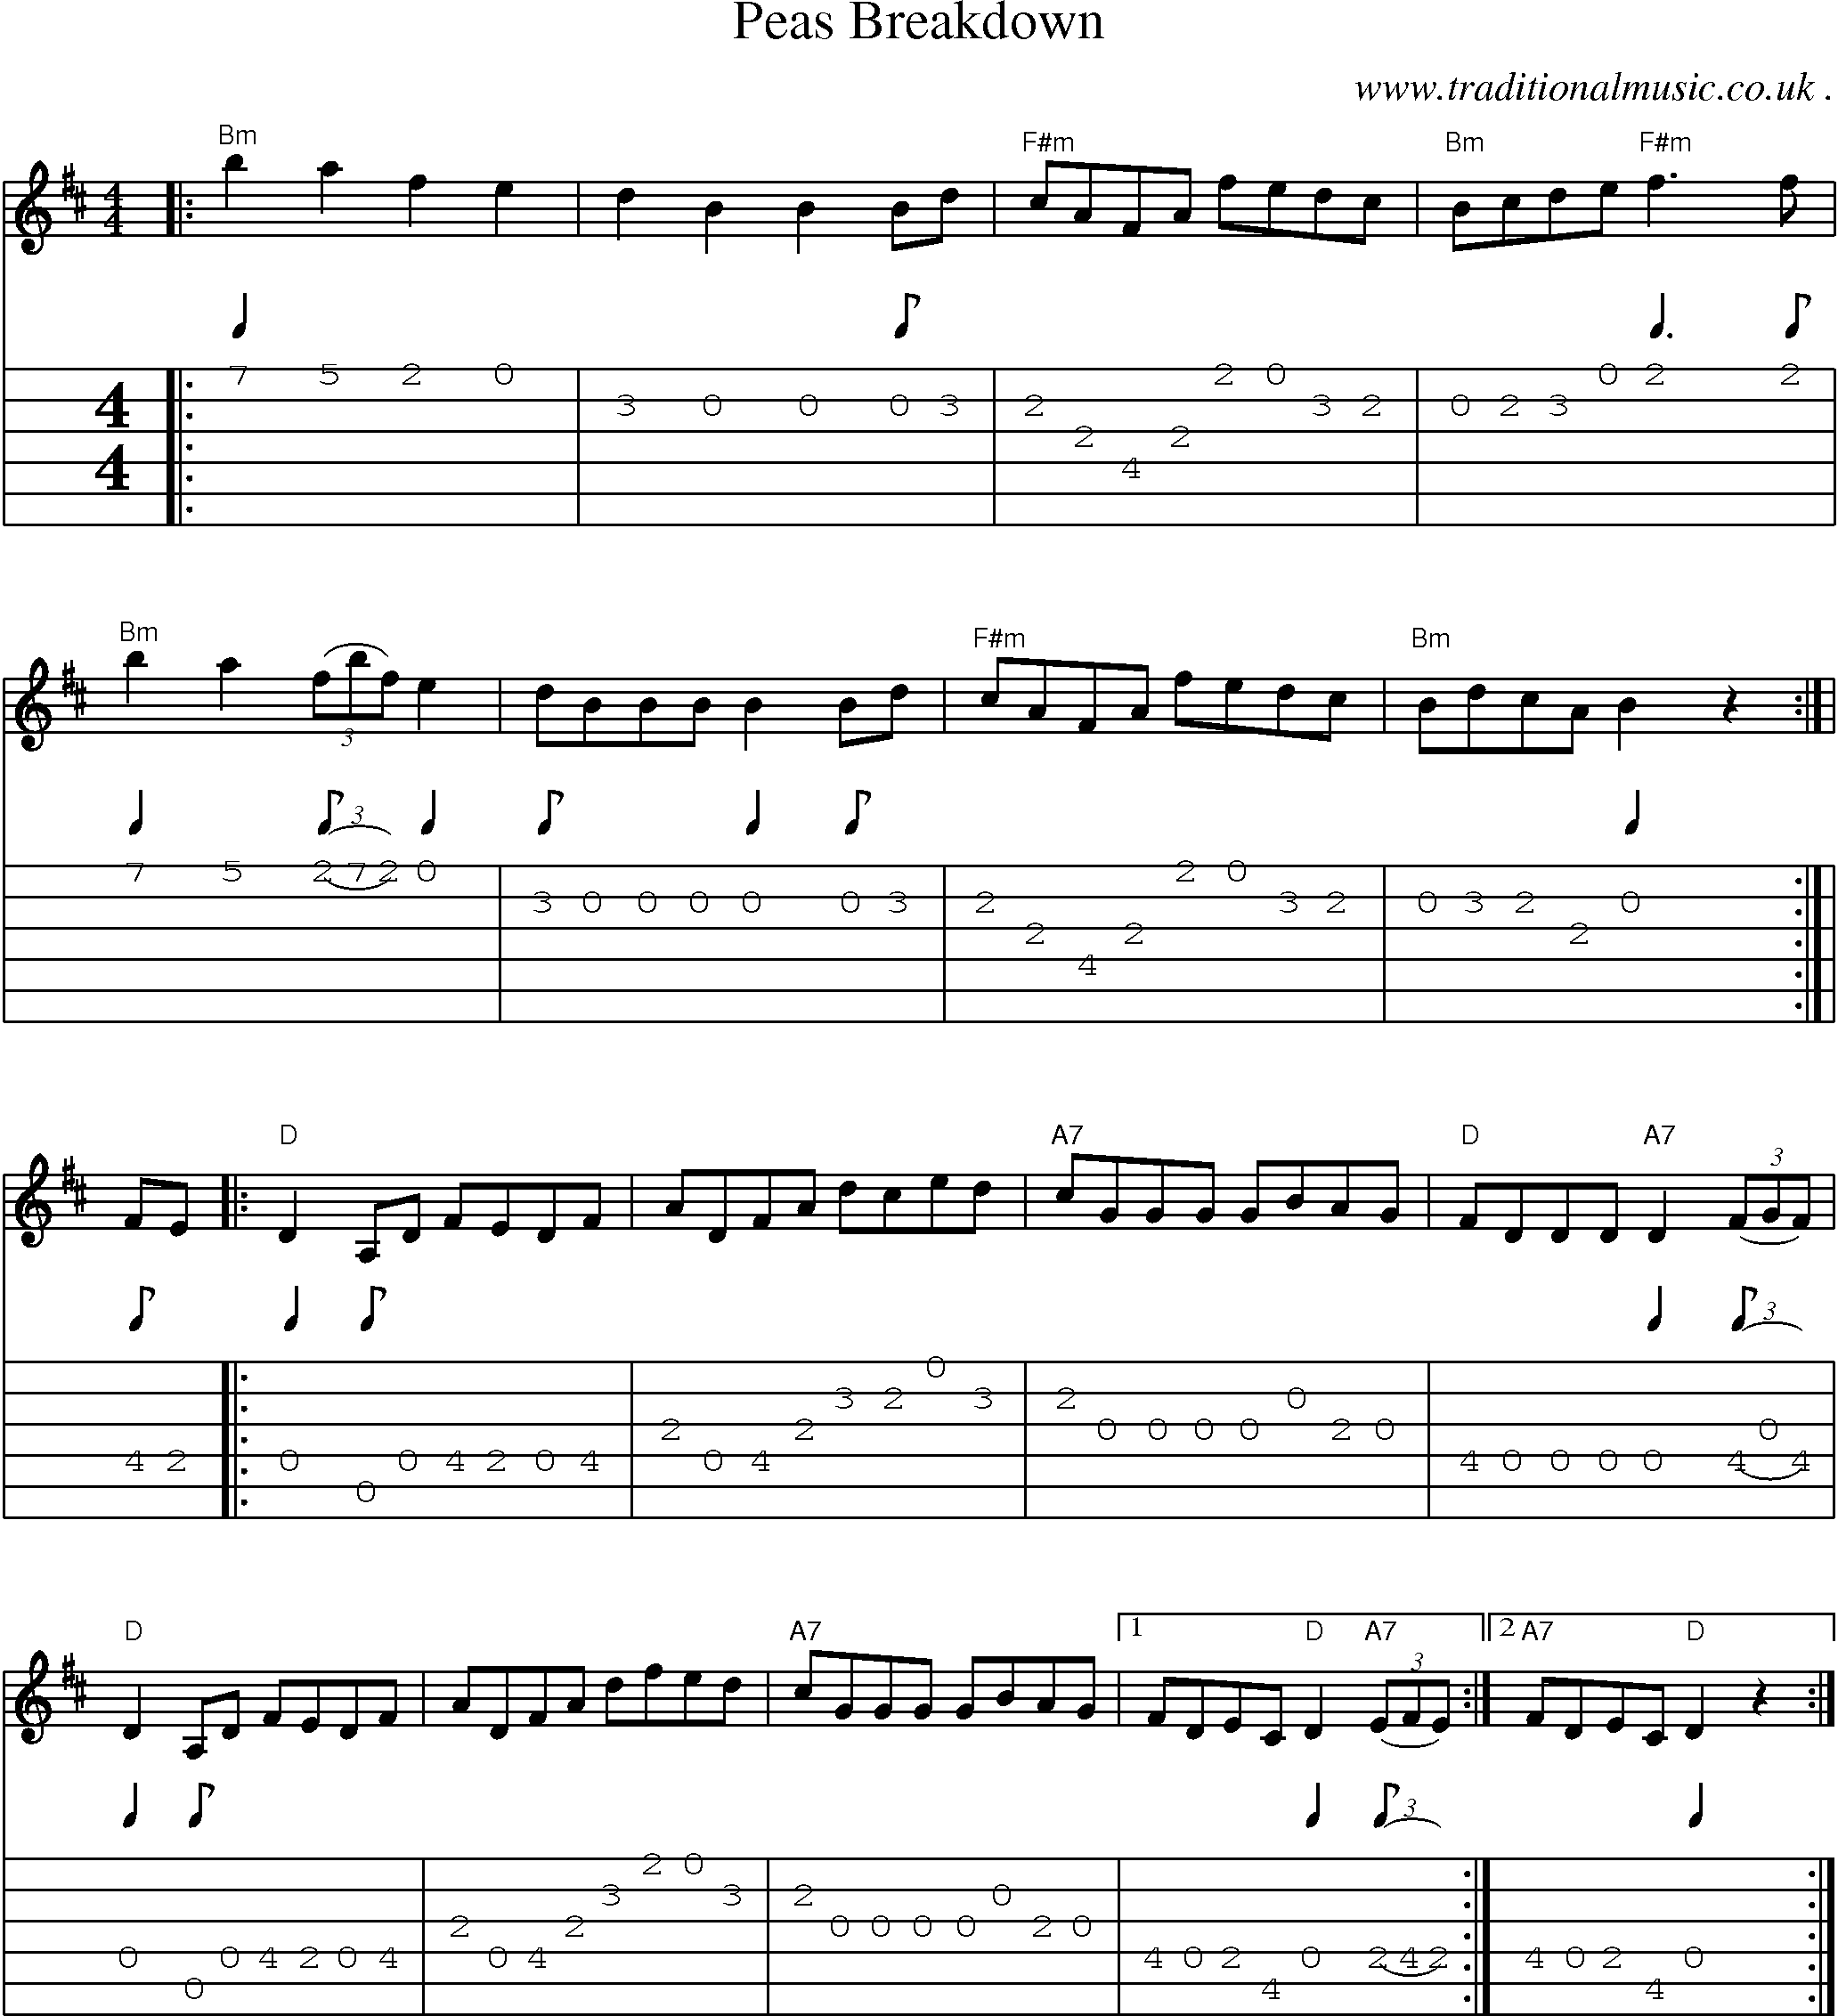 Music Score and Guitar Tabs for Peas Breakdown